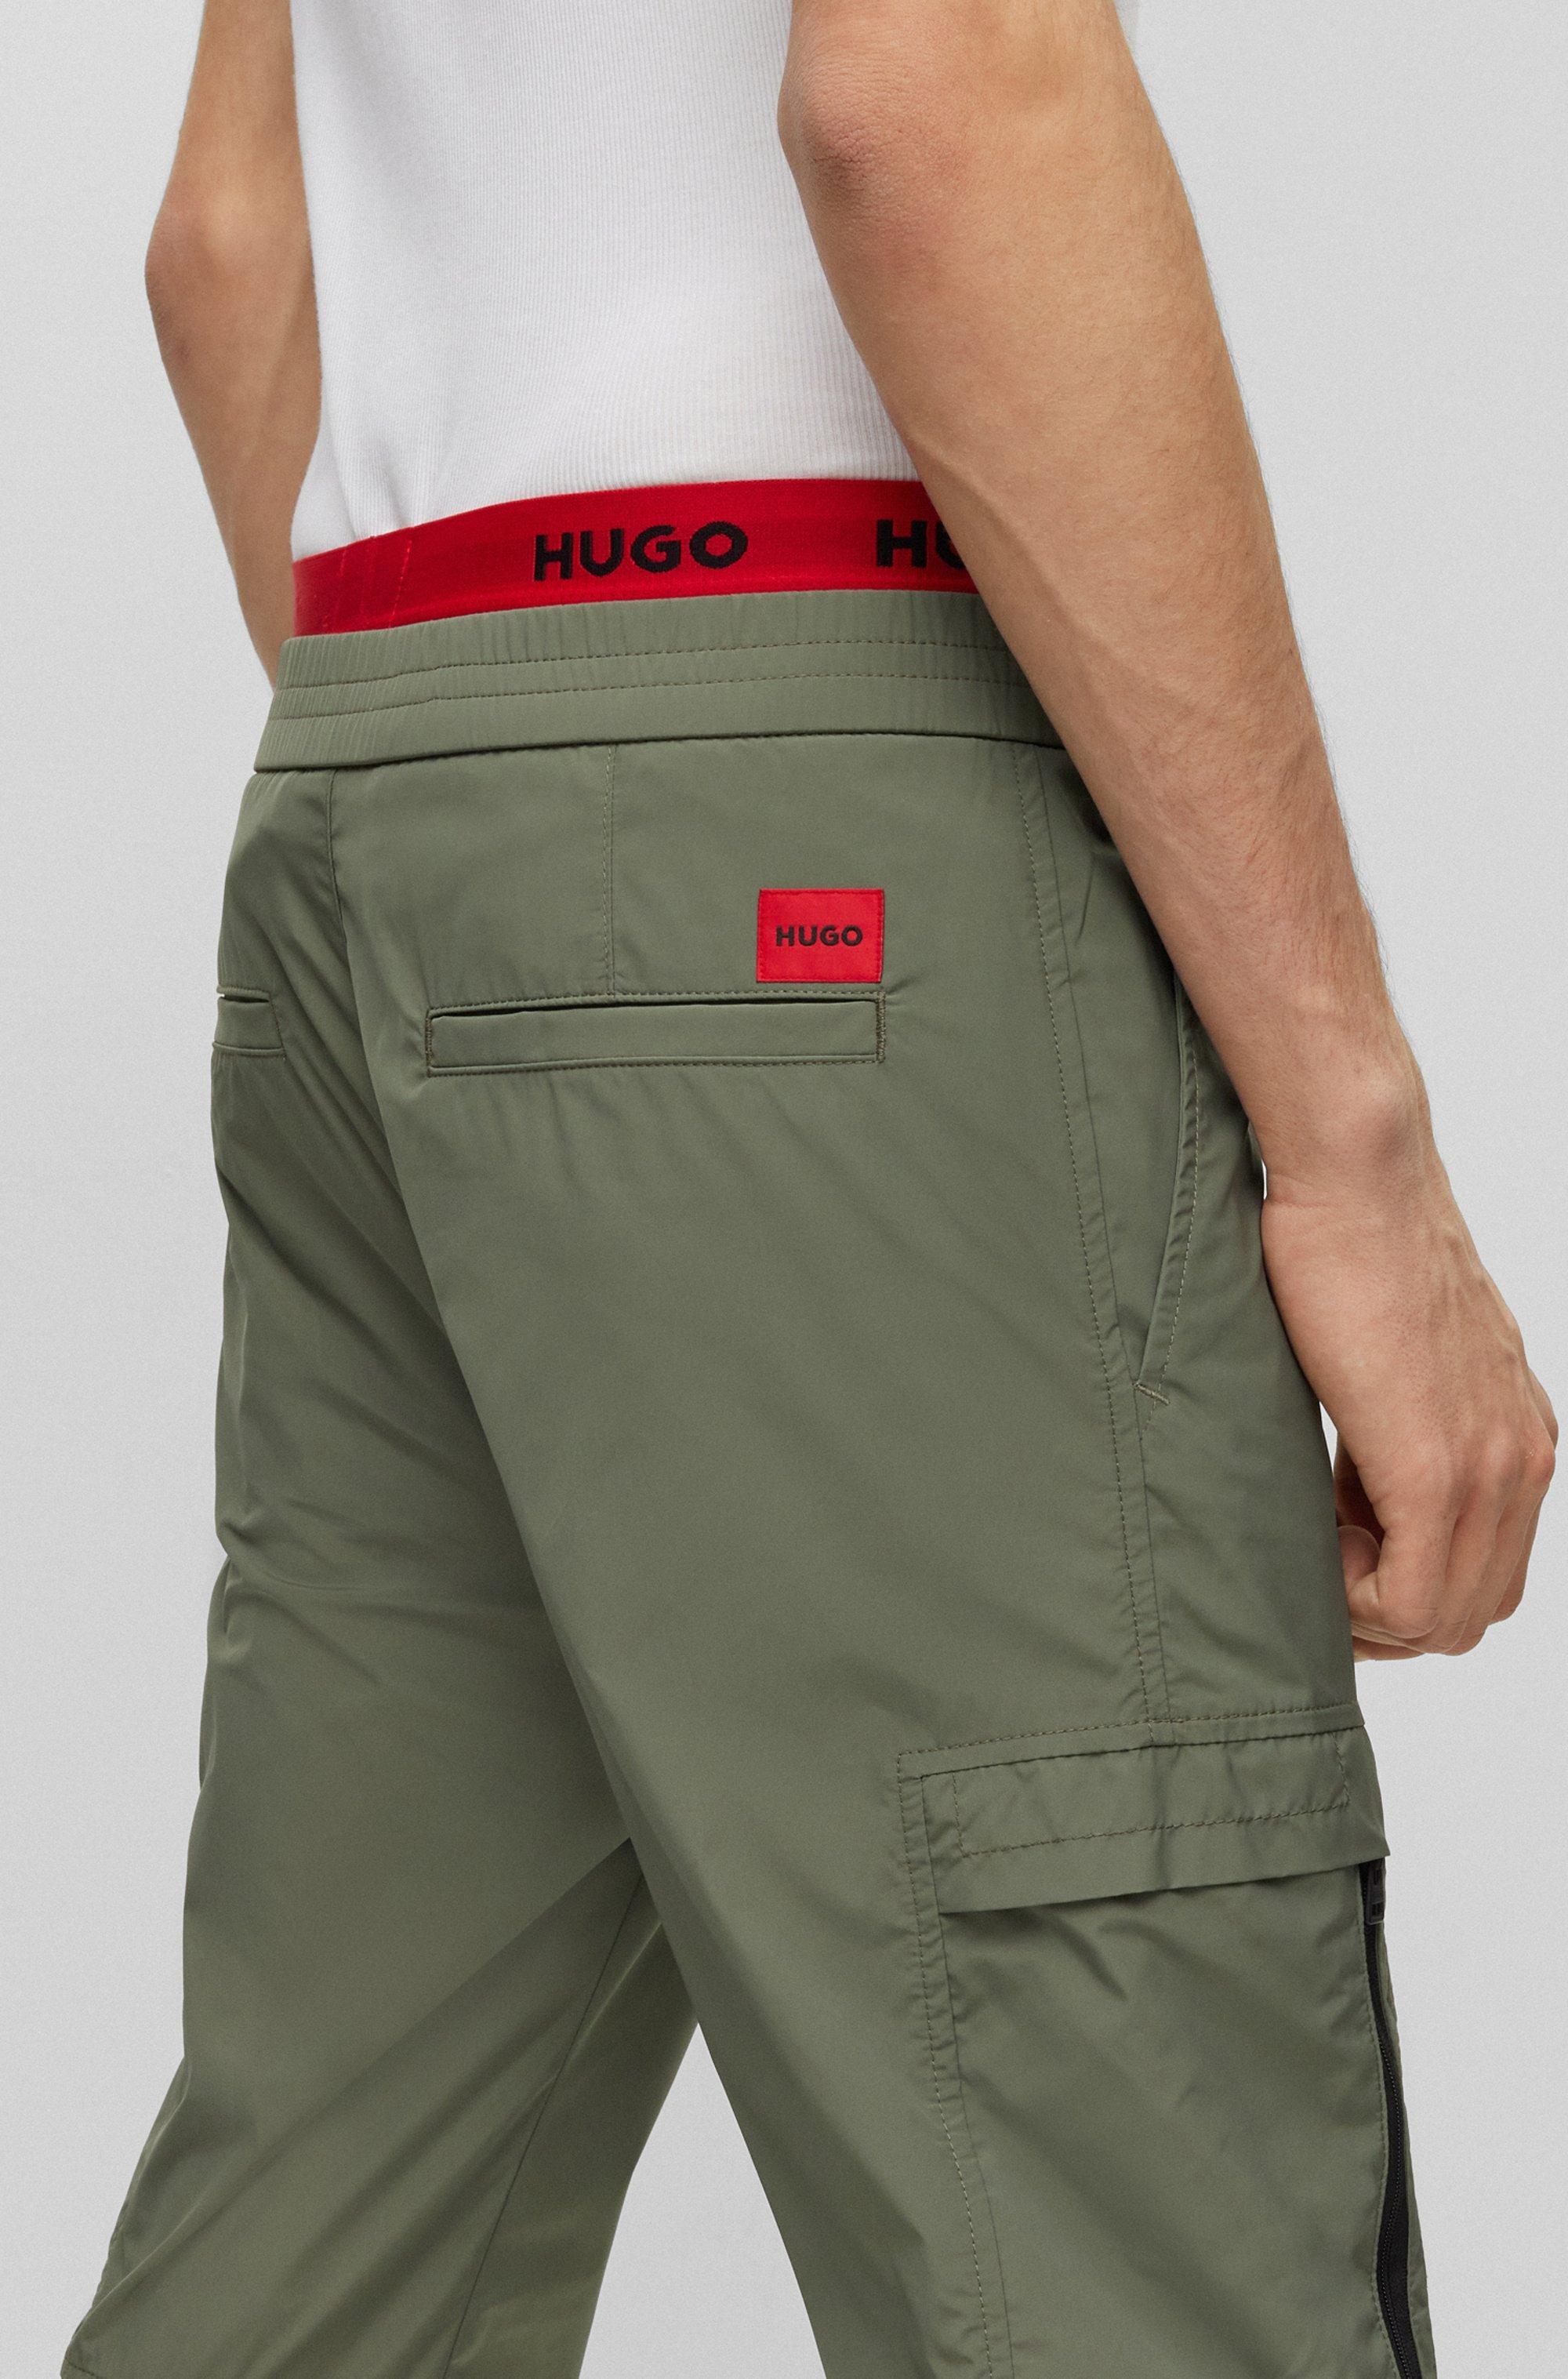 BOSS by HUGO BOSS Slim-fit Cuffed Trousers With Red Logo Label in Green for  Men | Lyst